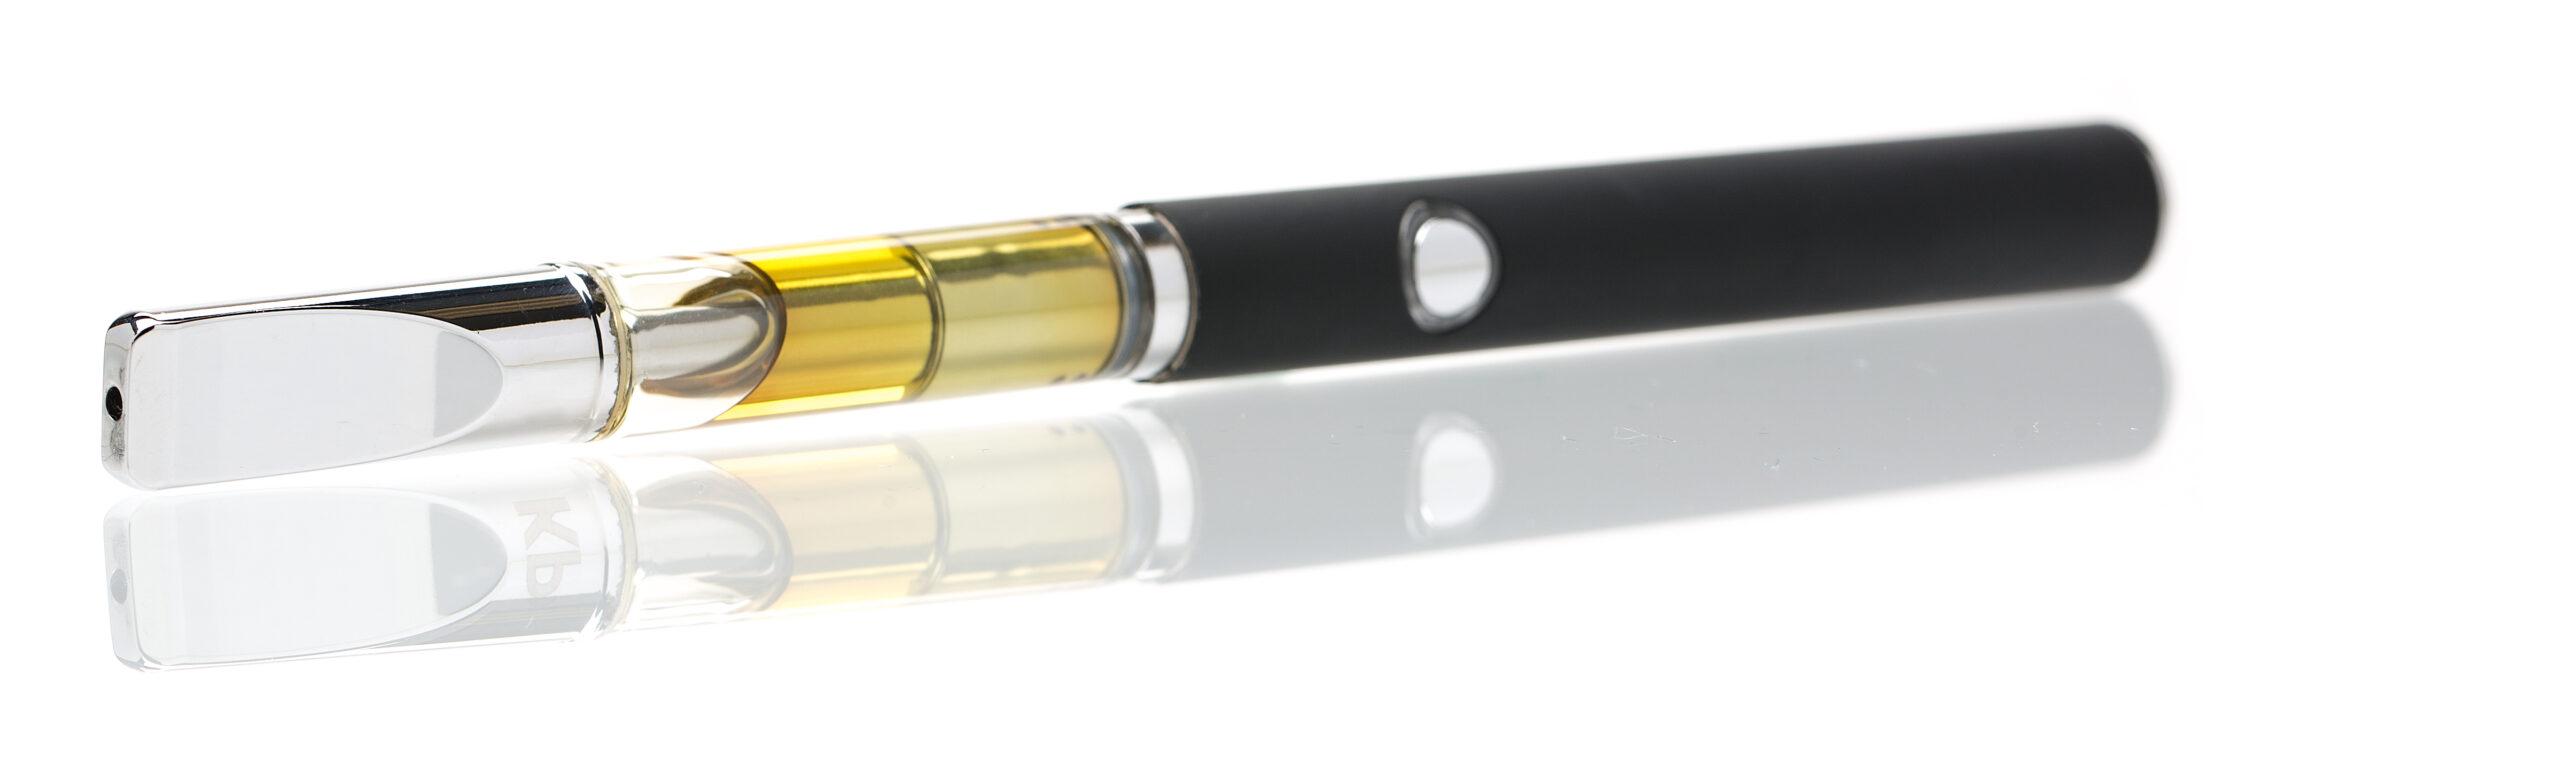 Master the Art of Vaping: 510 Thread Cartridges with Amberz Extracts